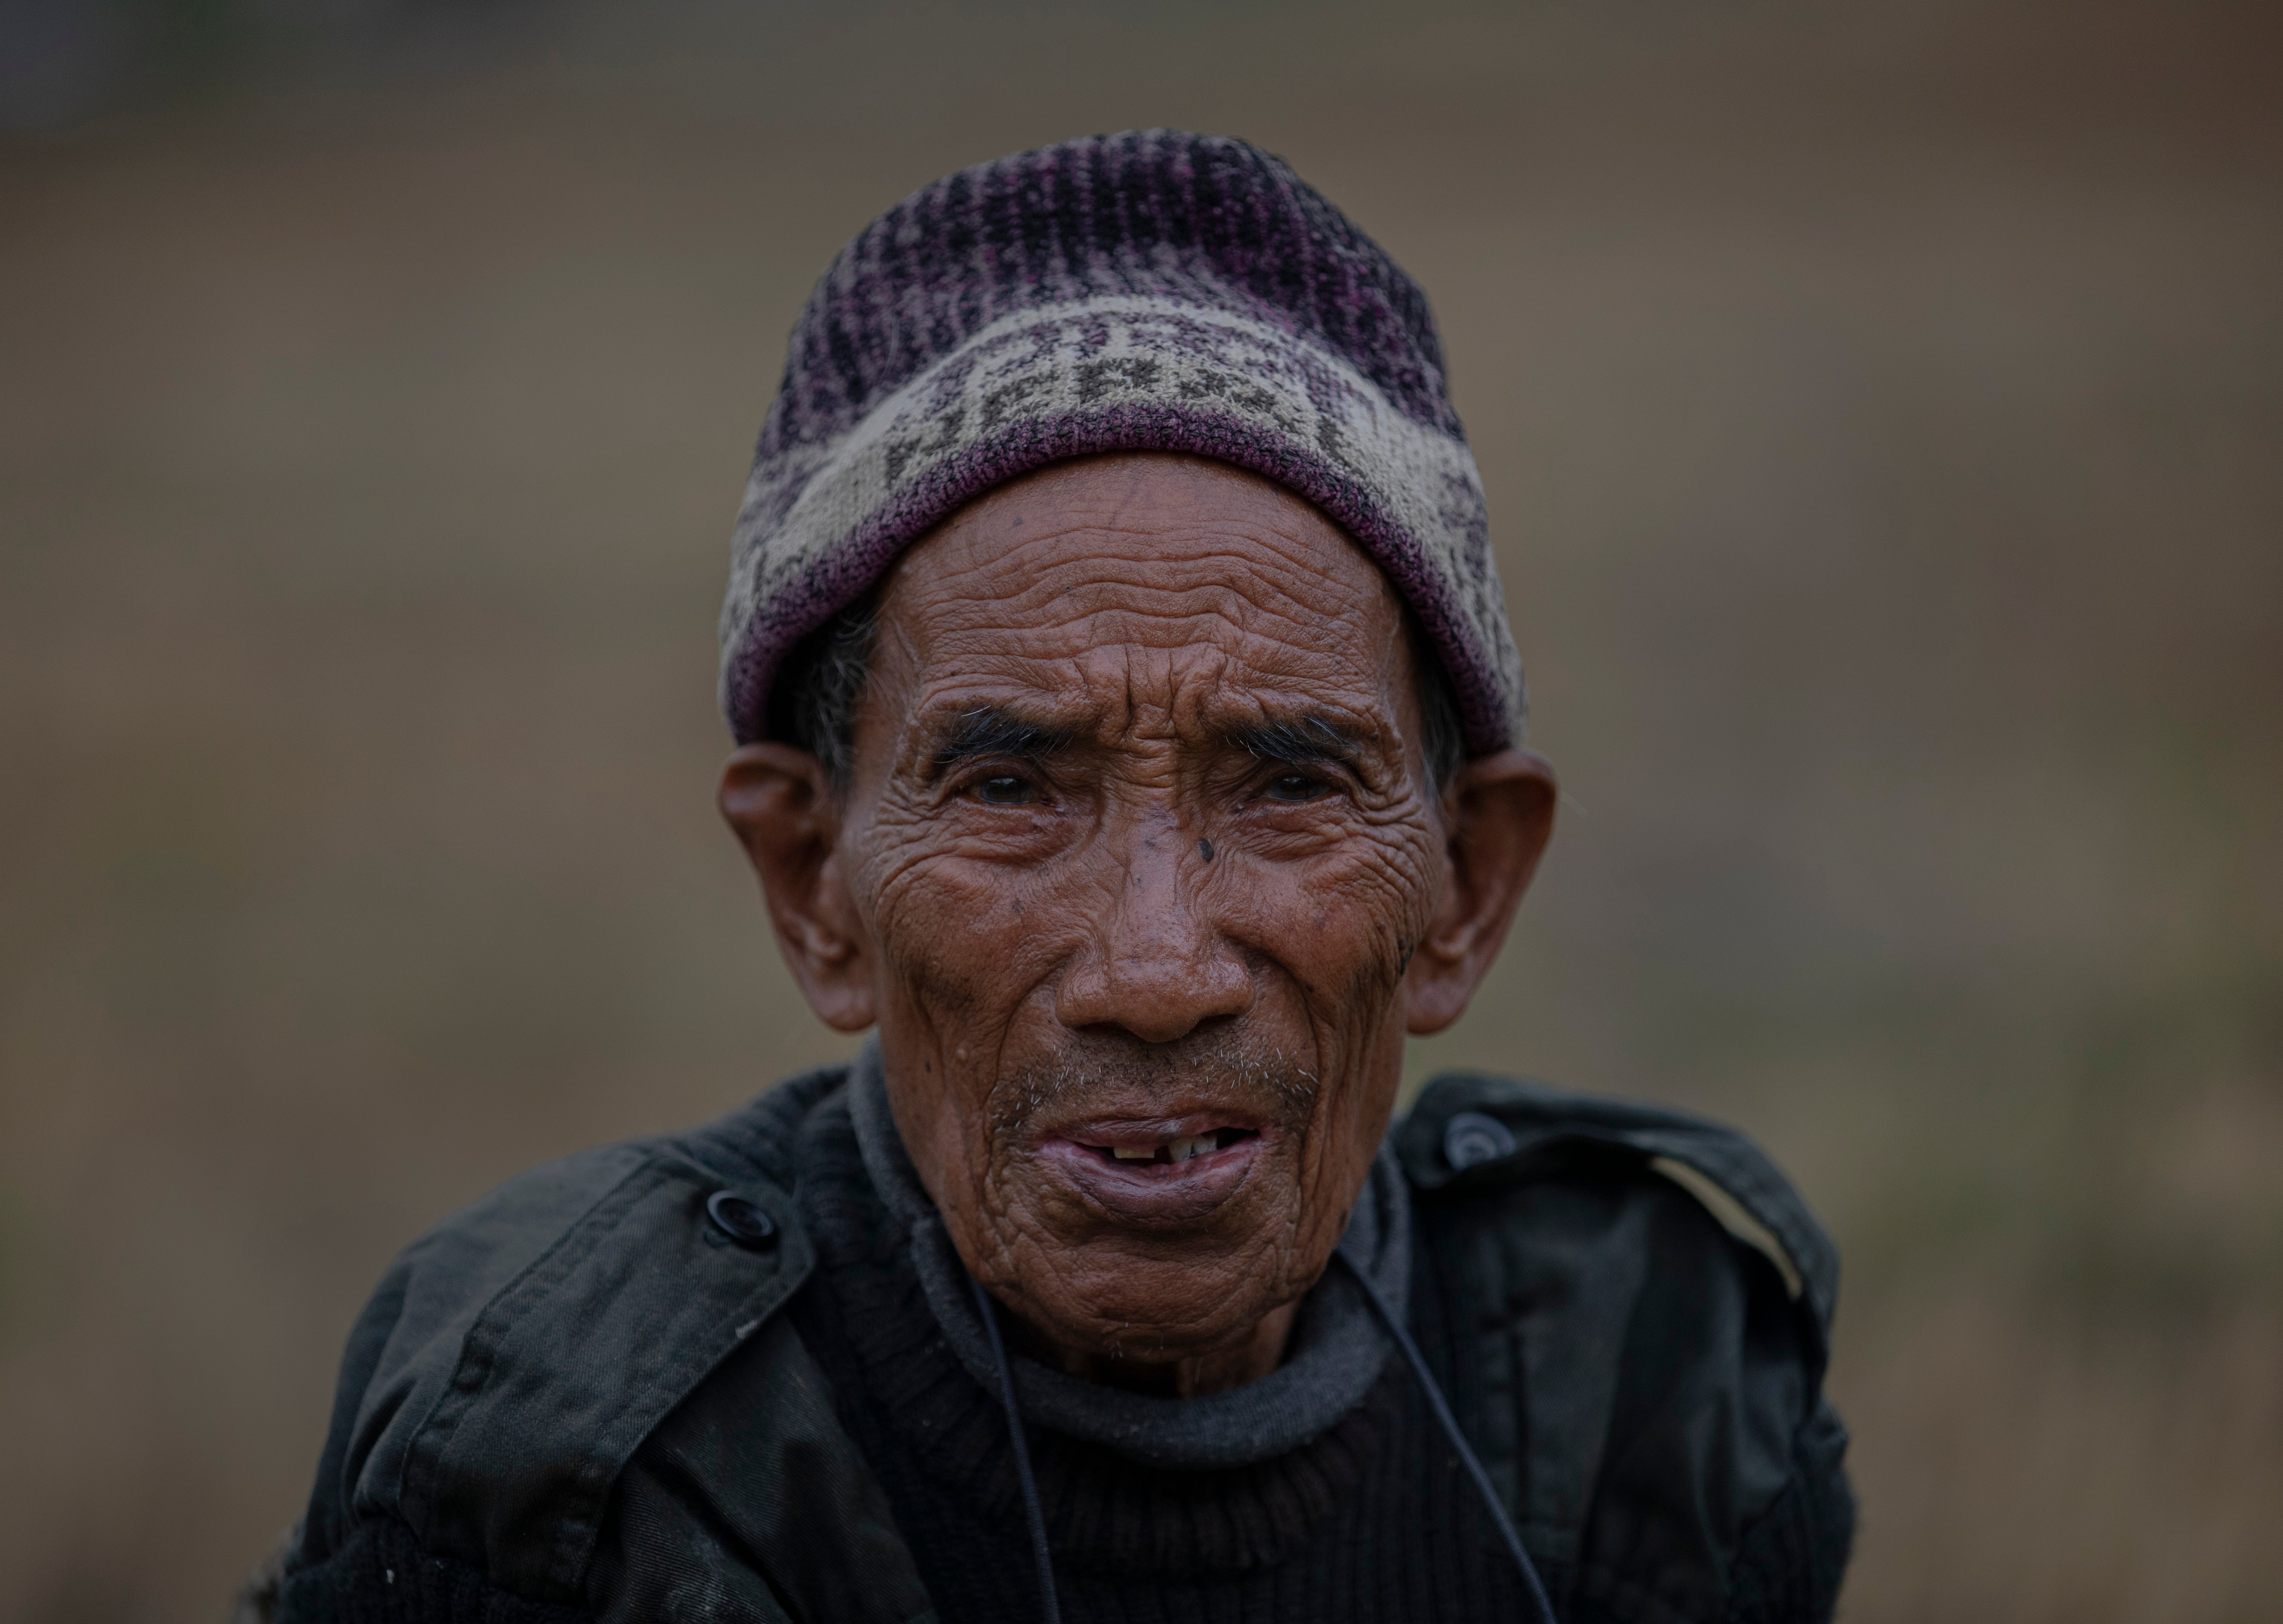 Sankar Narayan Shrestha, 94, takes care of his cattle in Helabuwesi, Nepal. Sankar has never been to school but now understands the importance of education. He said, “ Education is a must in life ”. Although he has no children, Sankar donated a piece of his land so that UWS could build a school in the village.